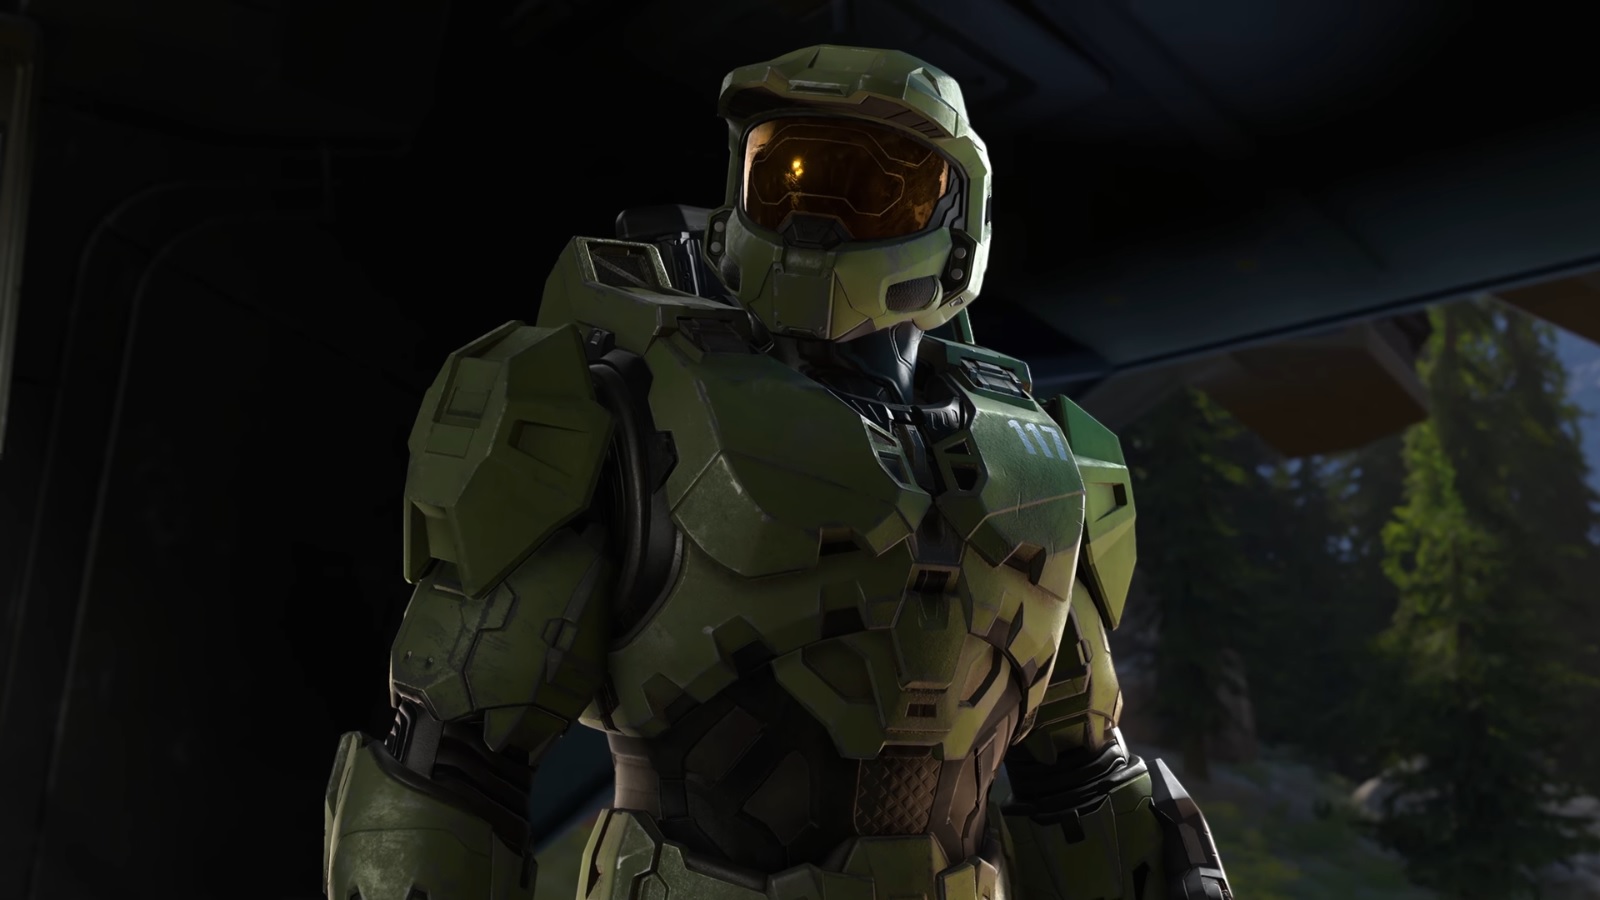 Halo Infinite Multiplayer Beginner's Guide – Tips and Tricks to Get Started